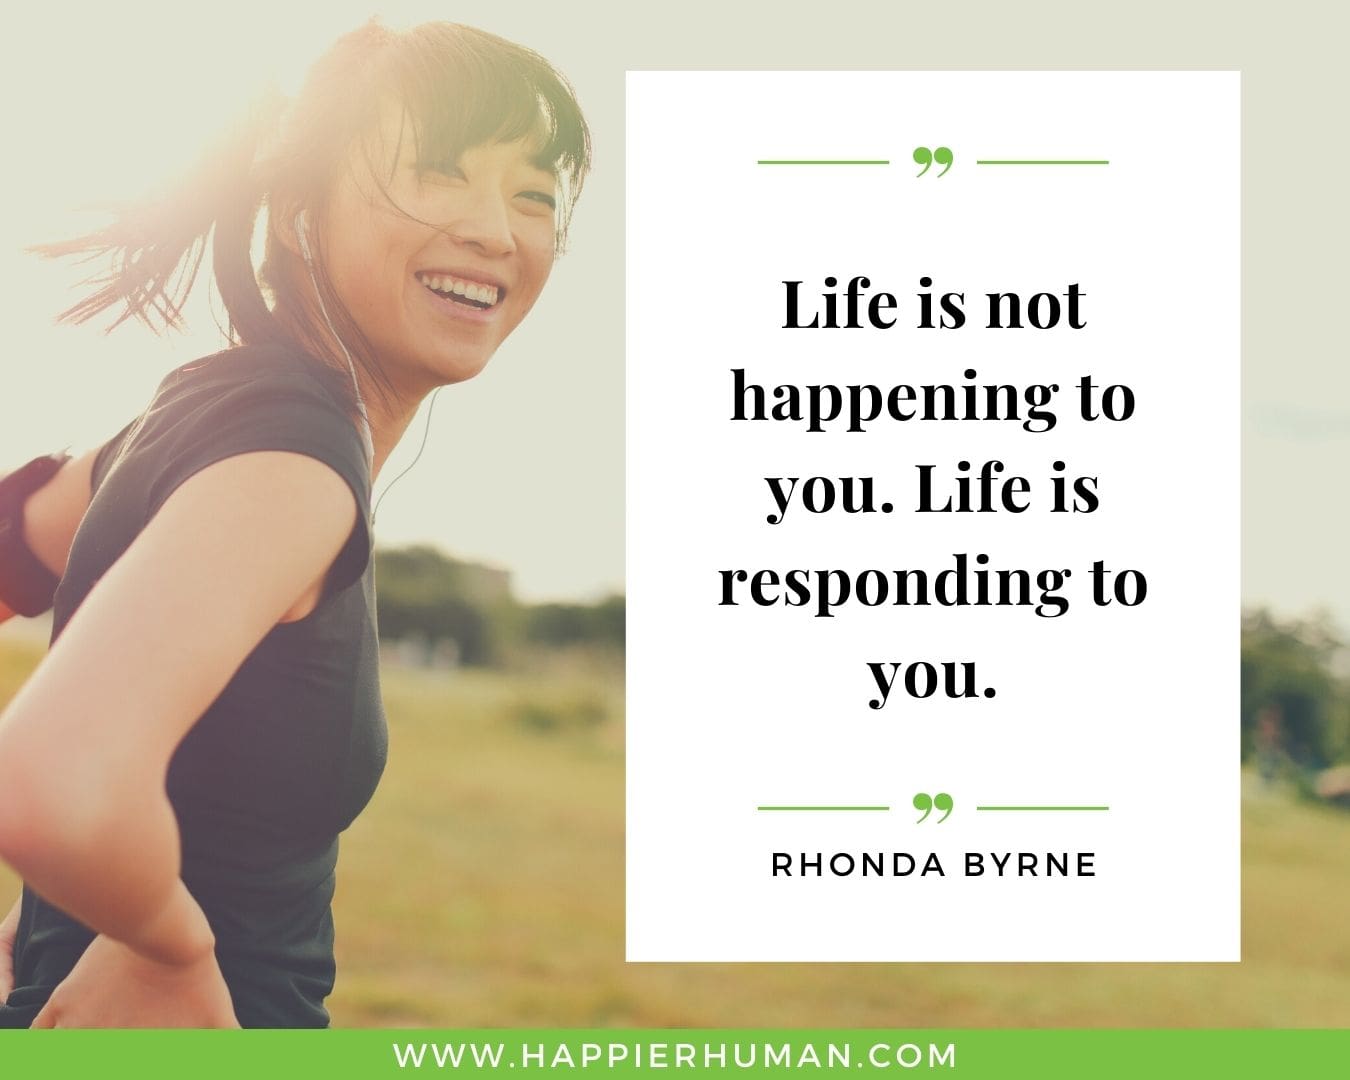 Positive Energy Quotes - “Life is not happening to you. Life is responding to you.” - Rhonda Byrne